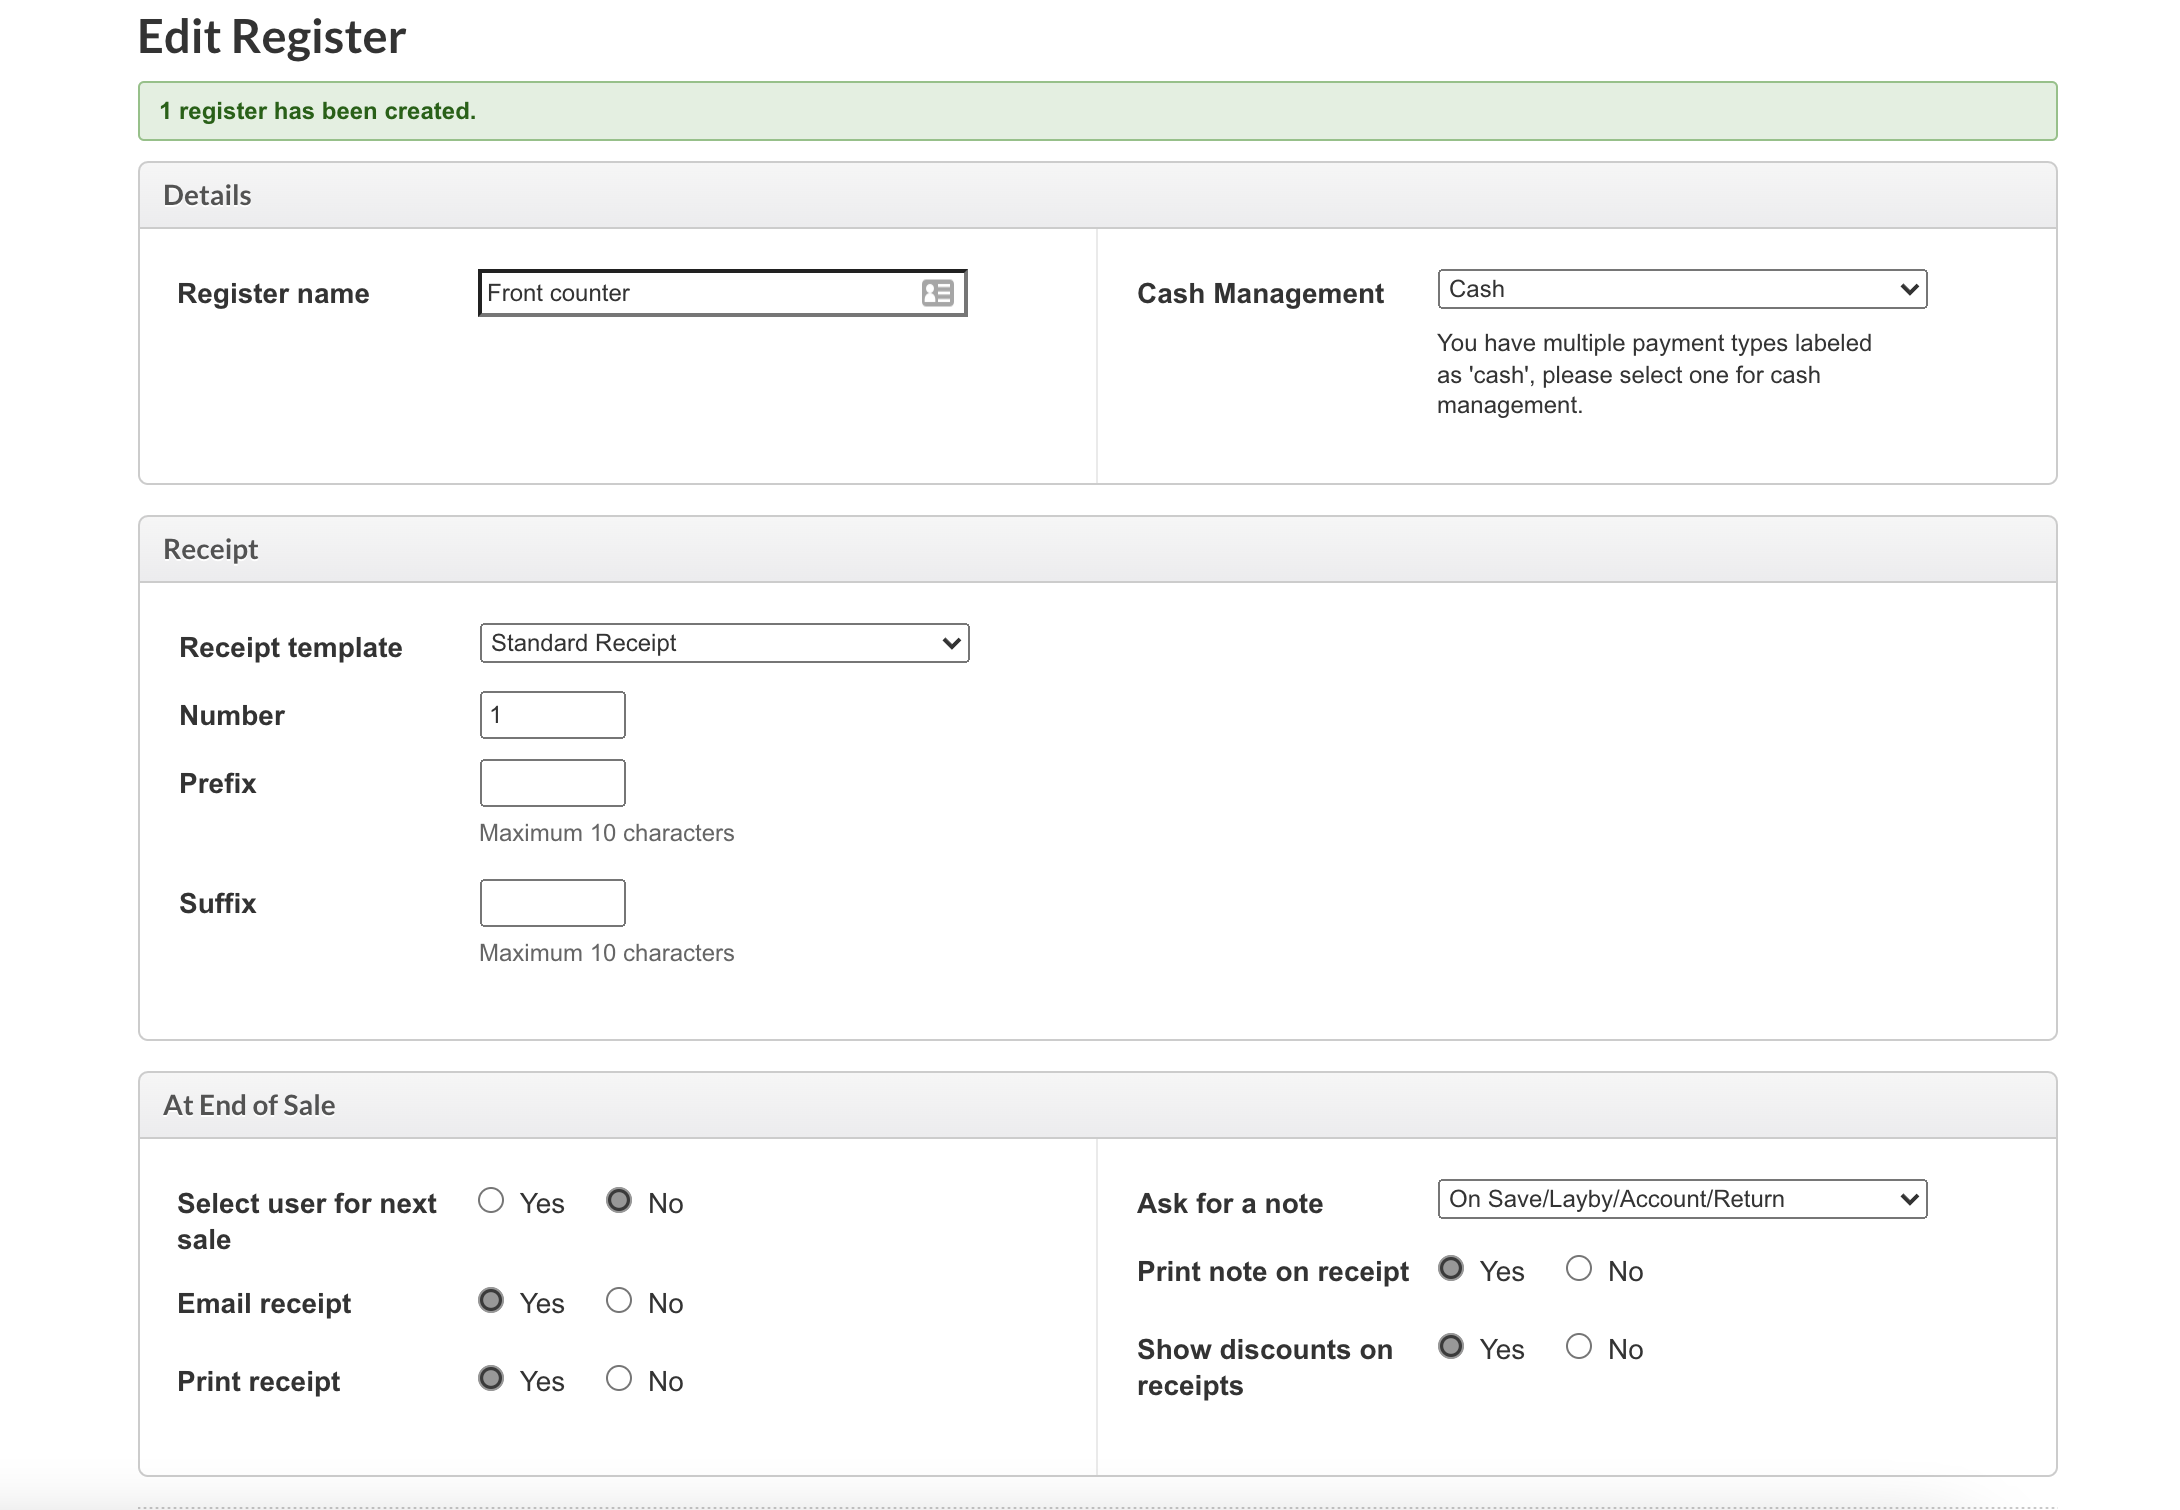 The register setup page showing the Edit Register input firelds to fill.